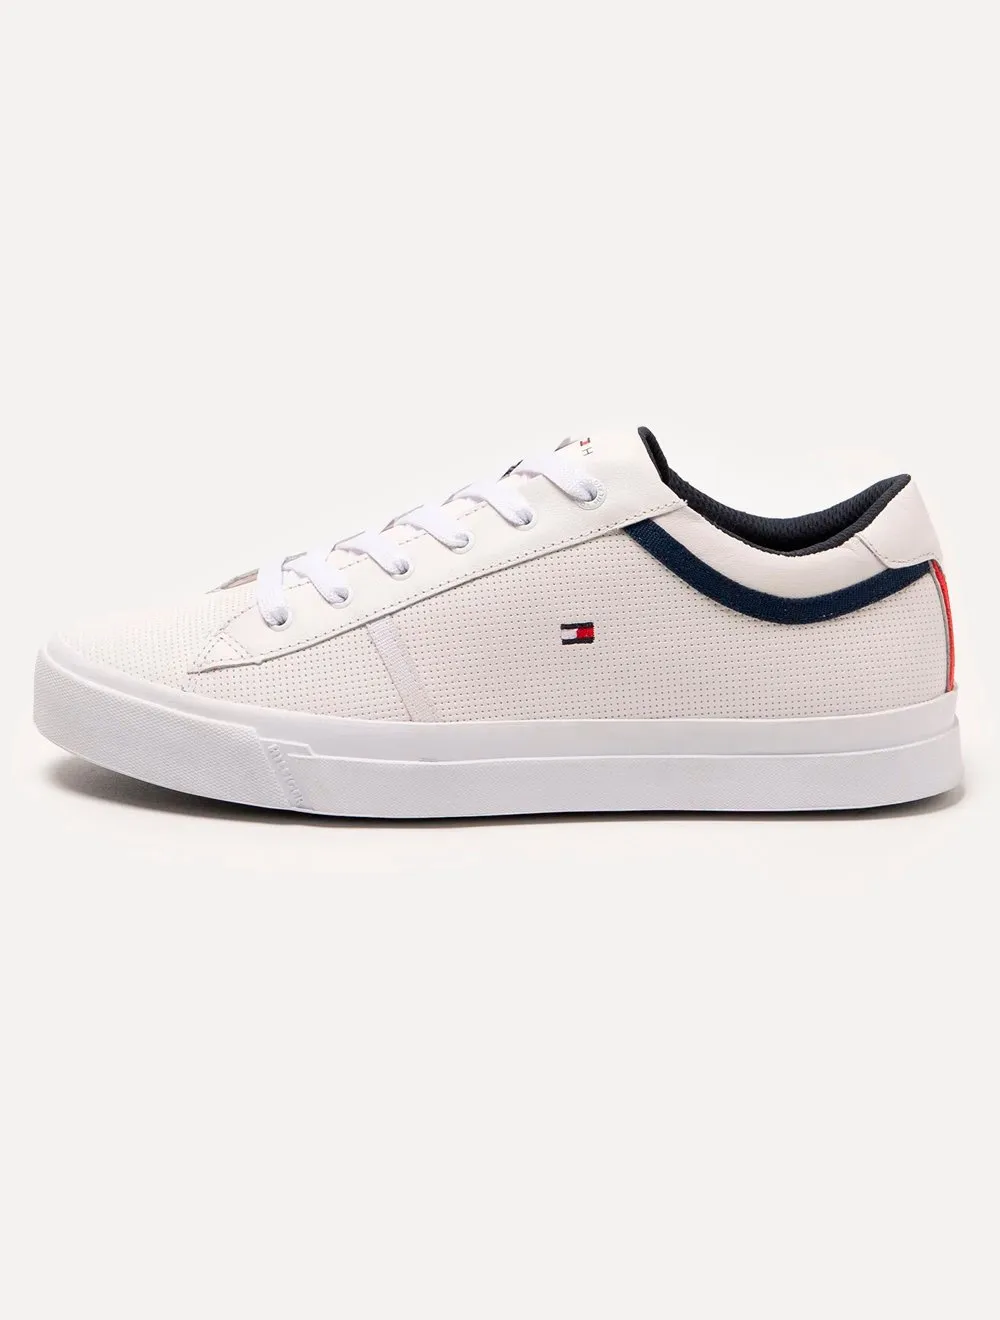 Tênis Tommy Hilfiger Masculino Jay 13A Iconic Leather Puched Branco